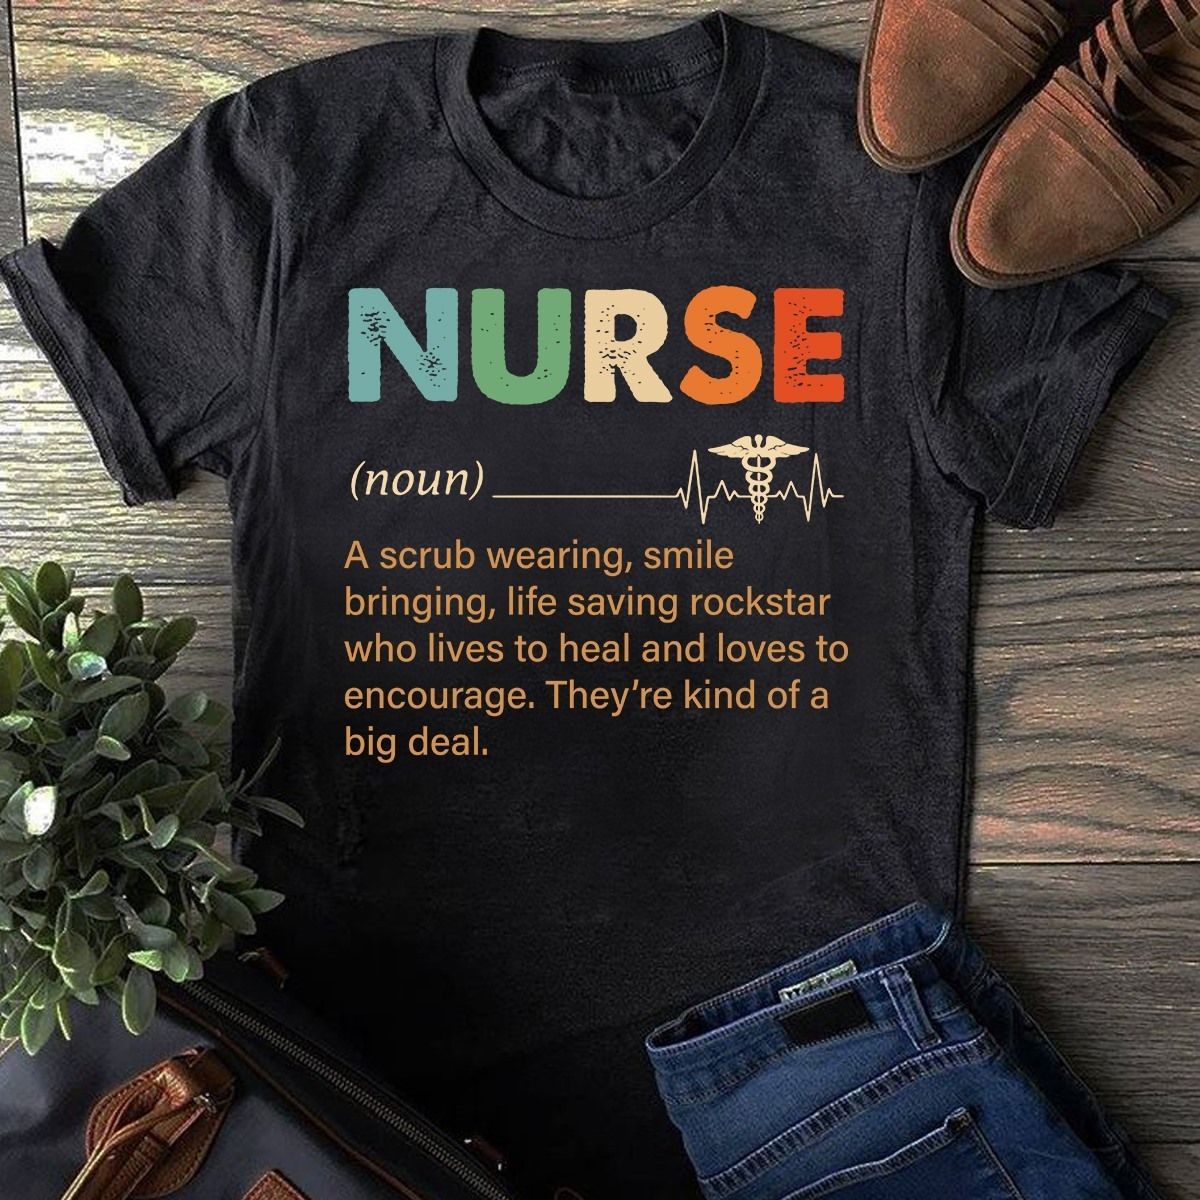 PresentsPrints, Nurse is a scrub wearing smile bringing life saving rockstar who lives to heal and loves to encourage, Nurse T-Shirt